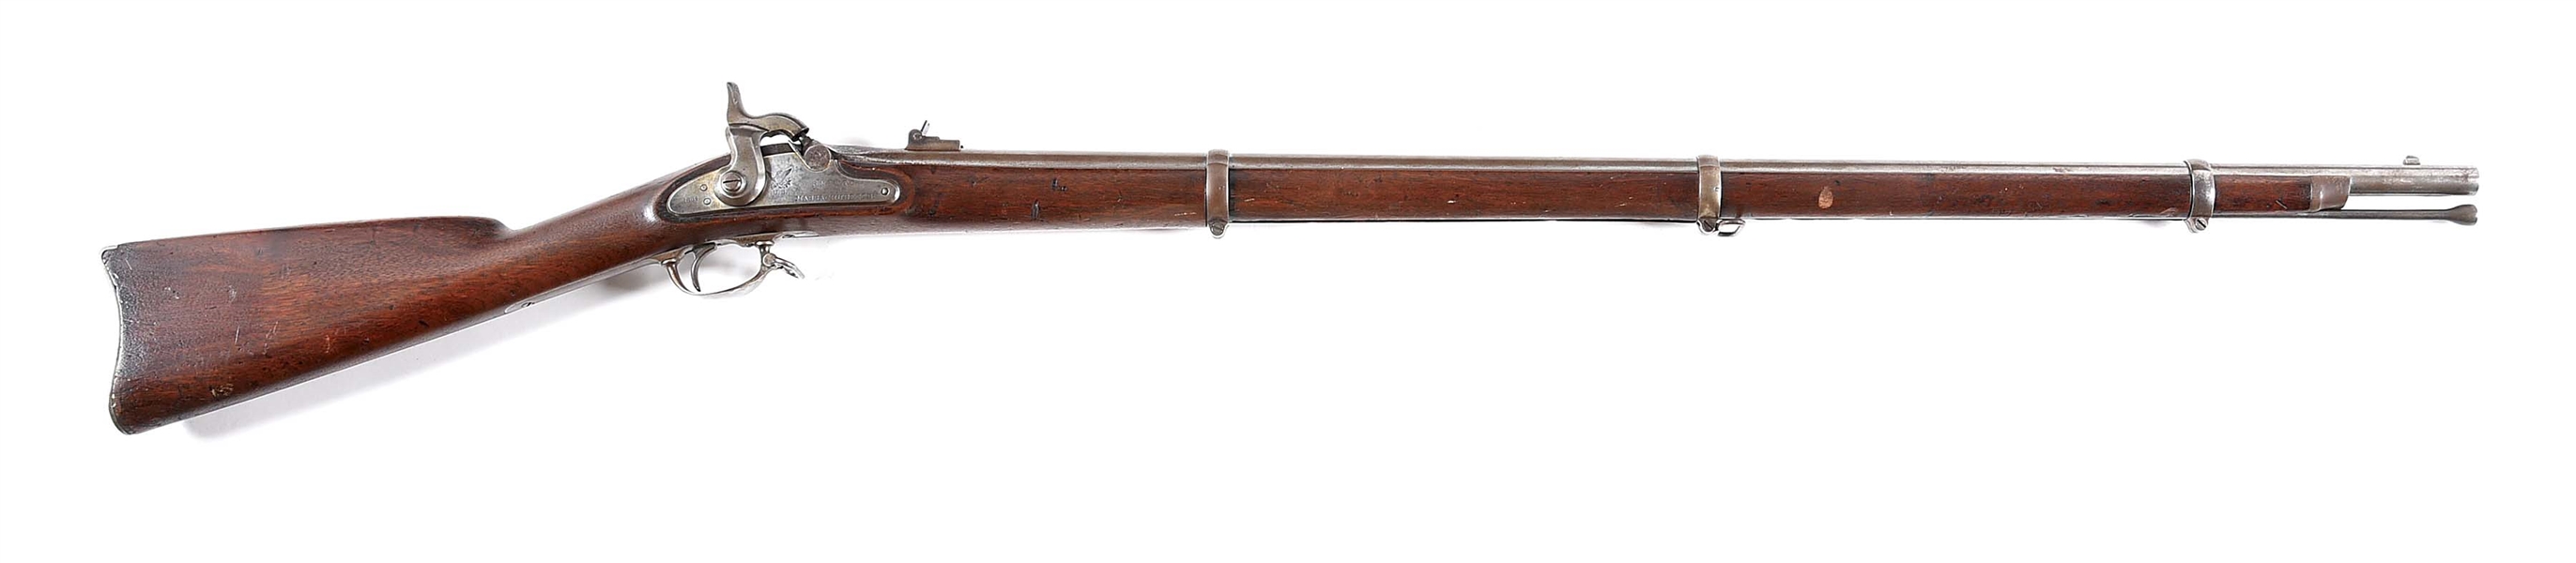 (A) NORRIS & CLEMENT 1861 PERCUSSION RIFLE.